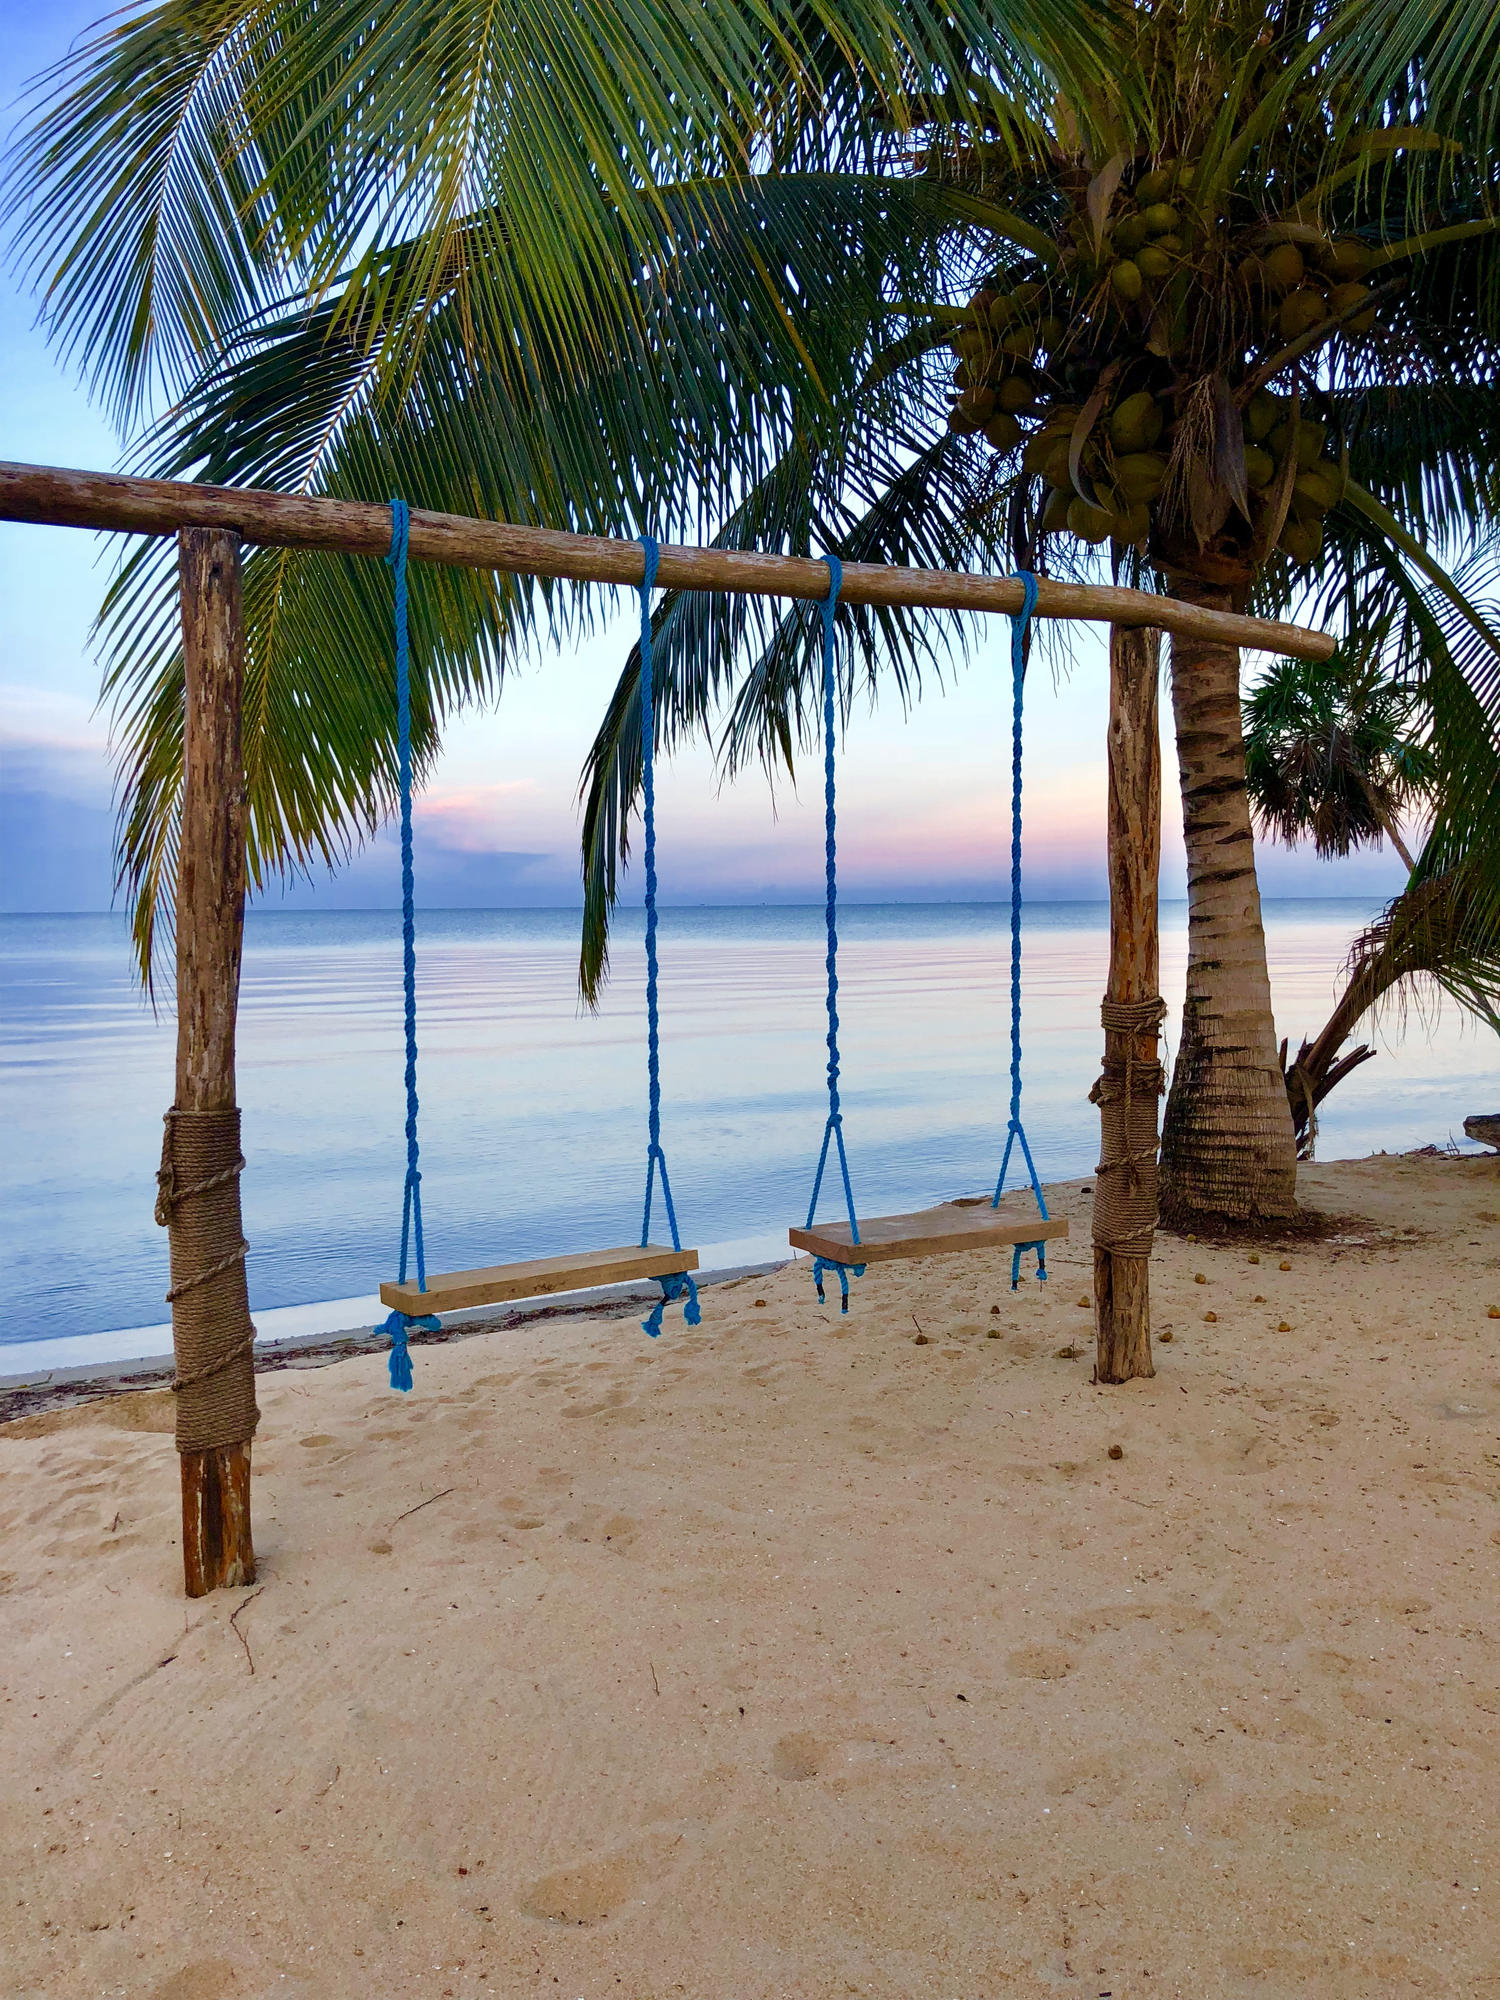 Sunrise at the swing from Pelicans Crossing Seaside Escape.